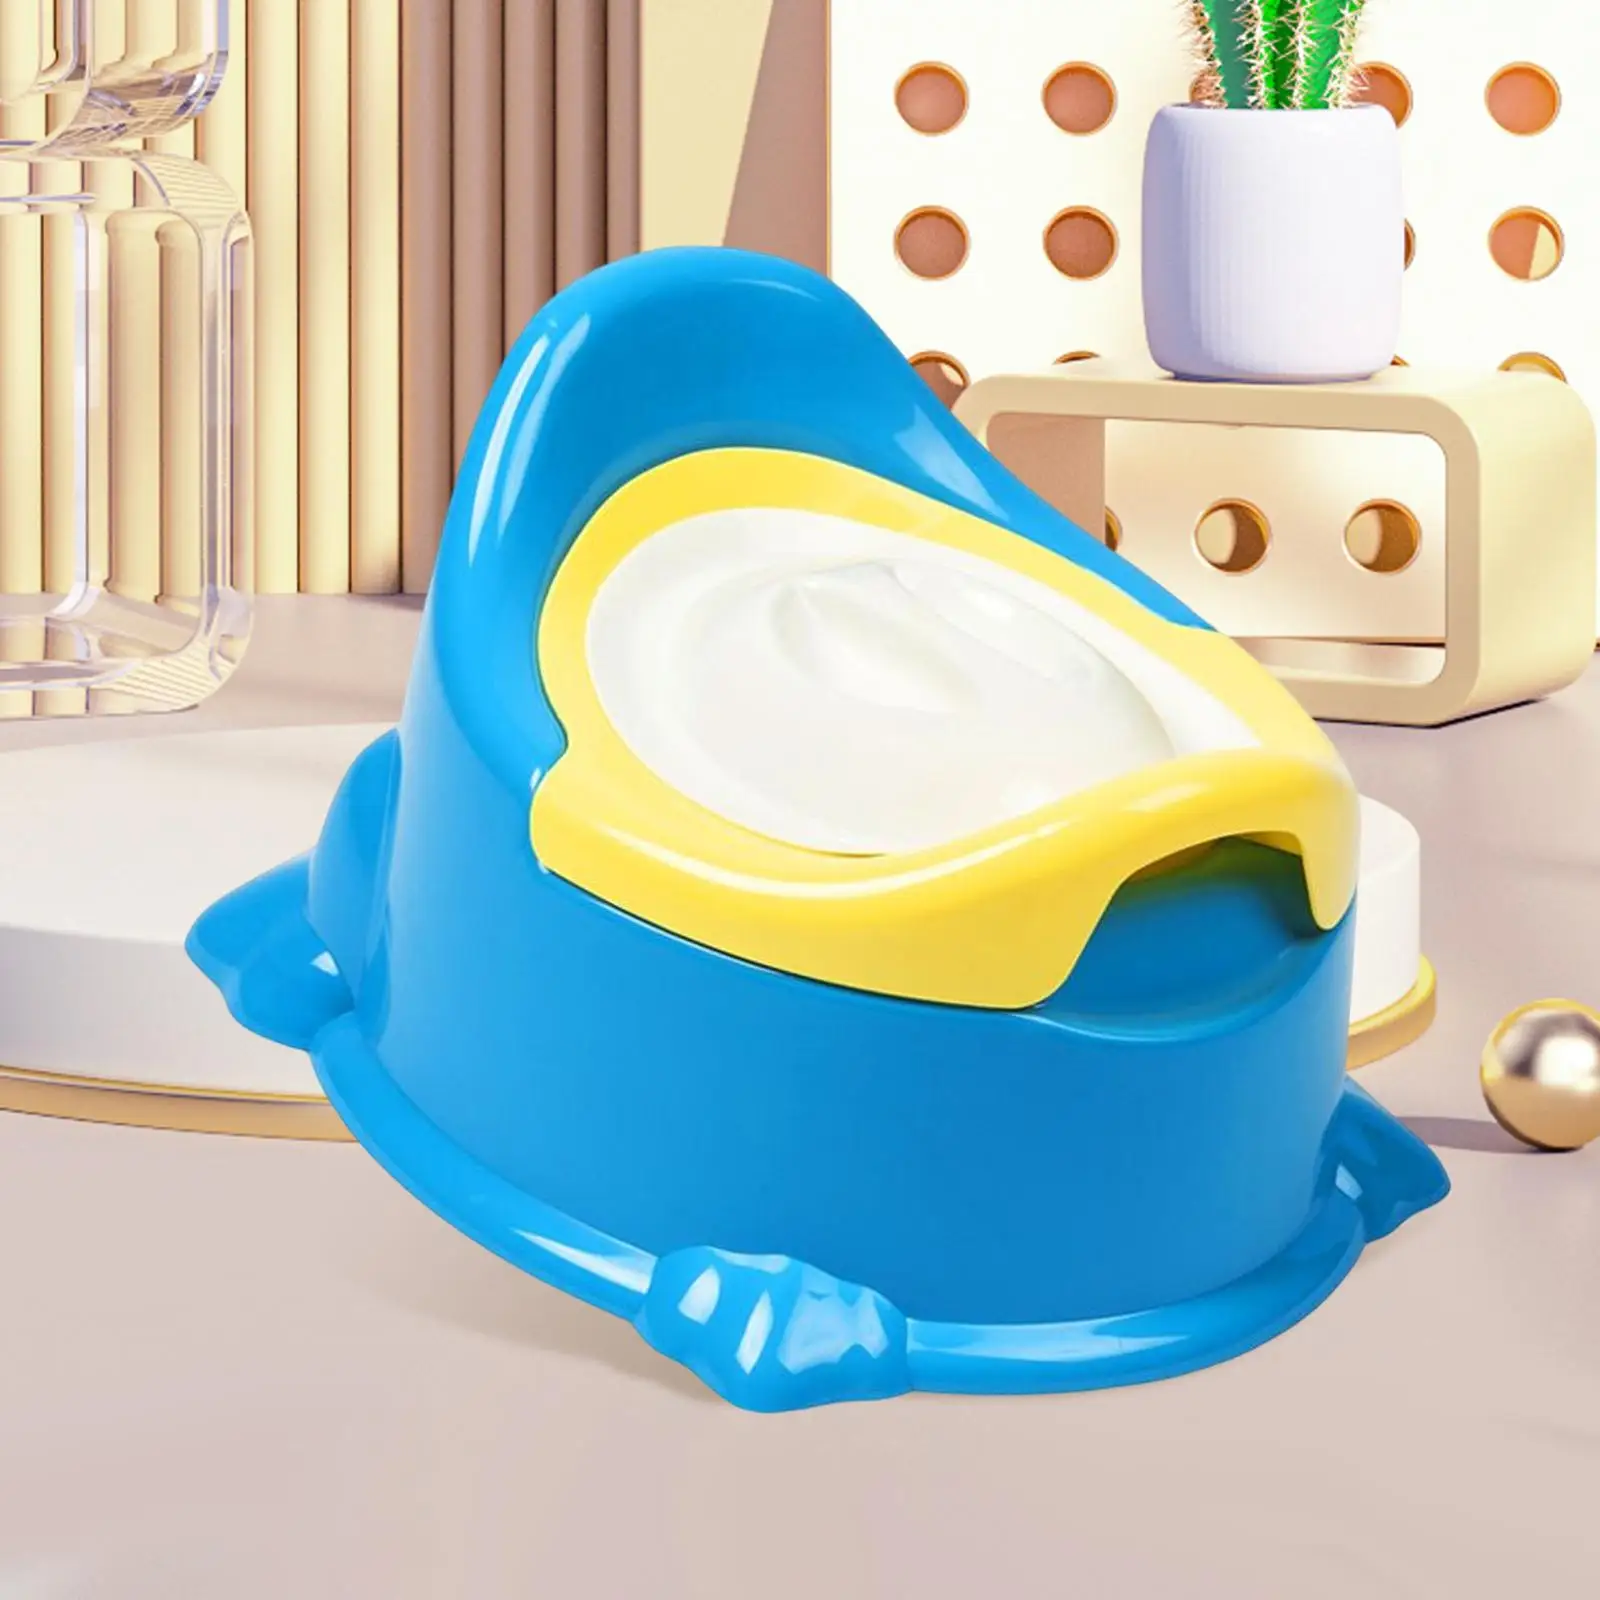 Portable Child Potty Toilet Training Seat Anti Skid Comfortable Stable Easy